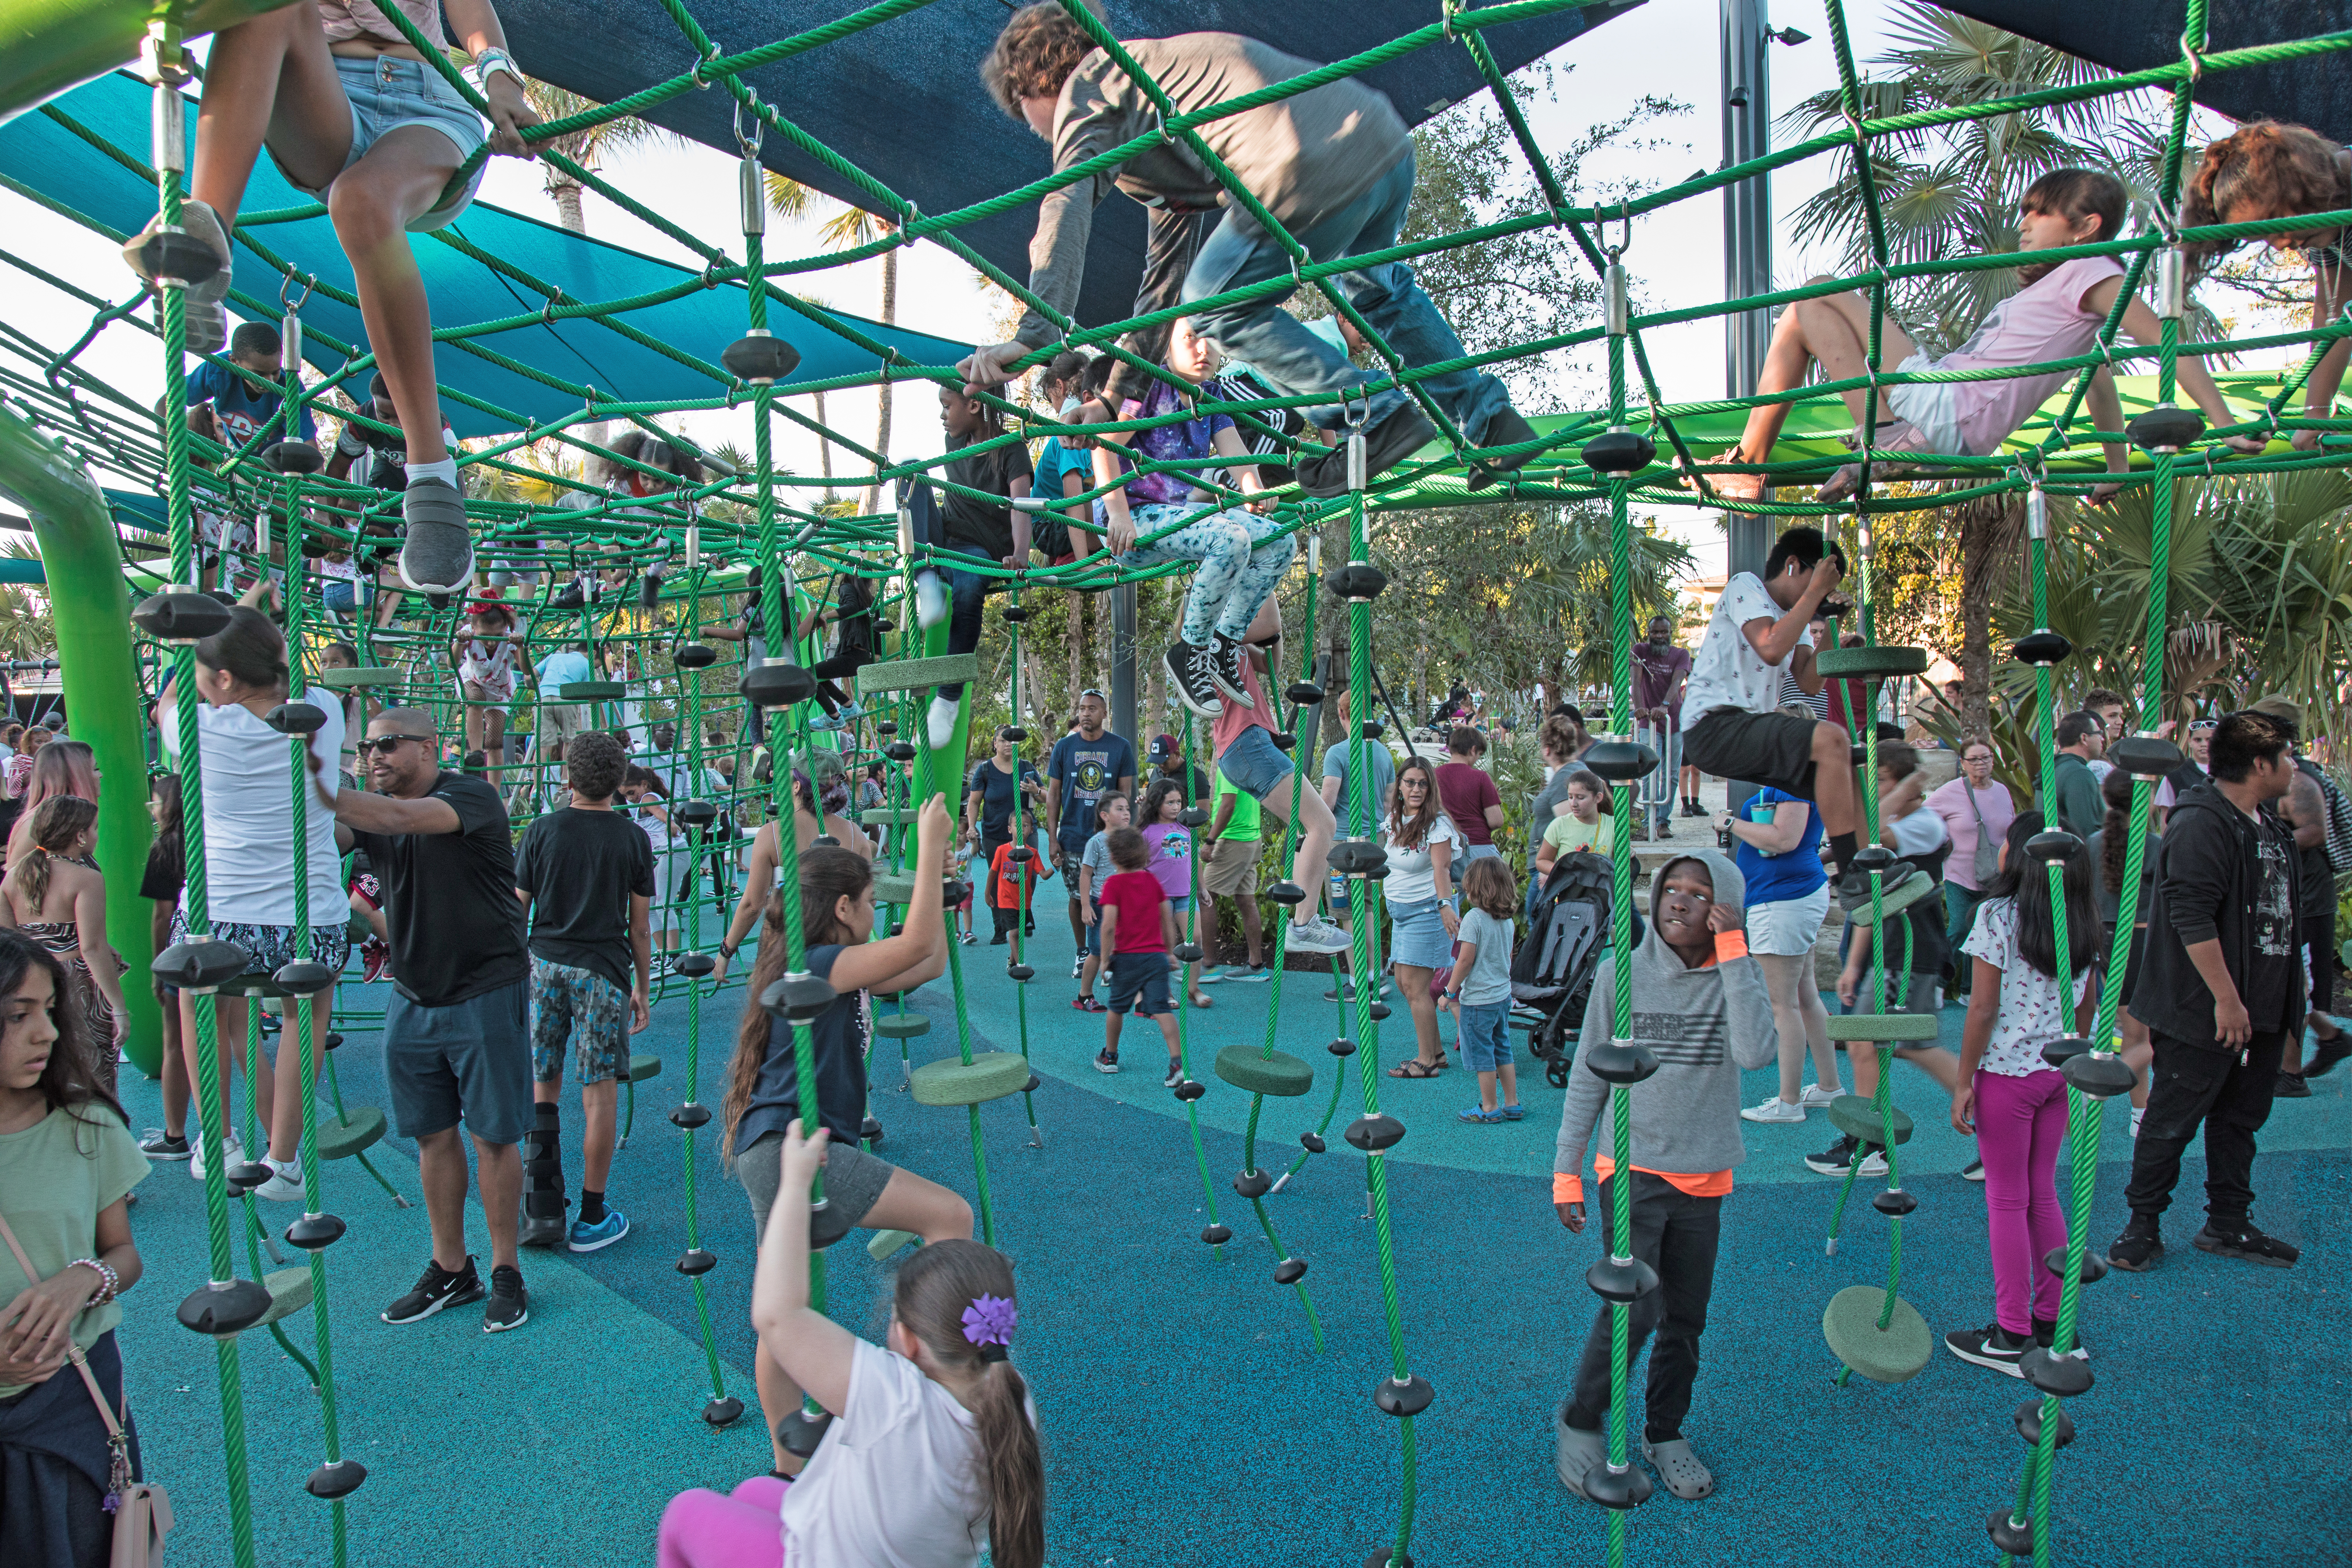 A bunch of children playing on a large play structure with hanging ropes to climb on